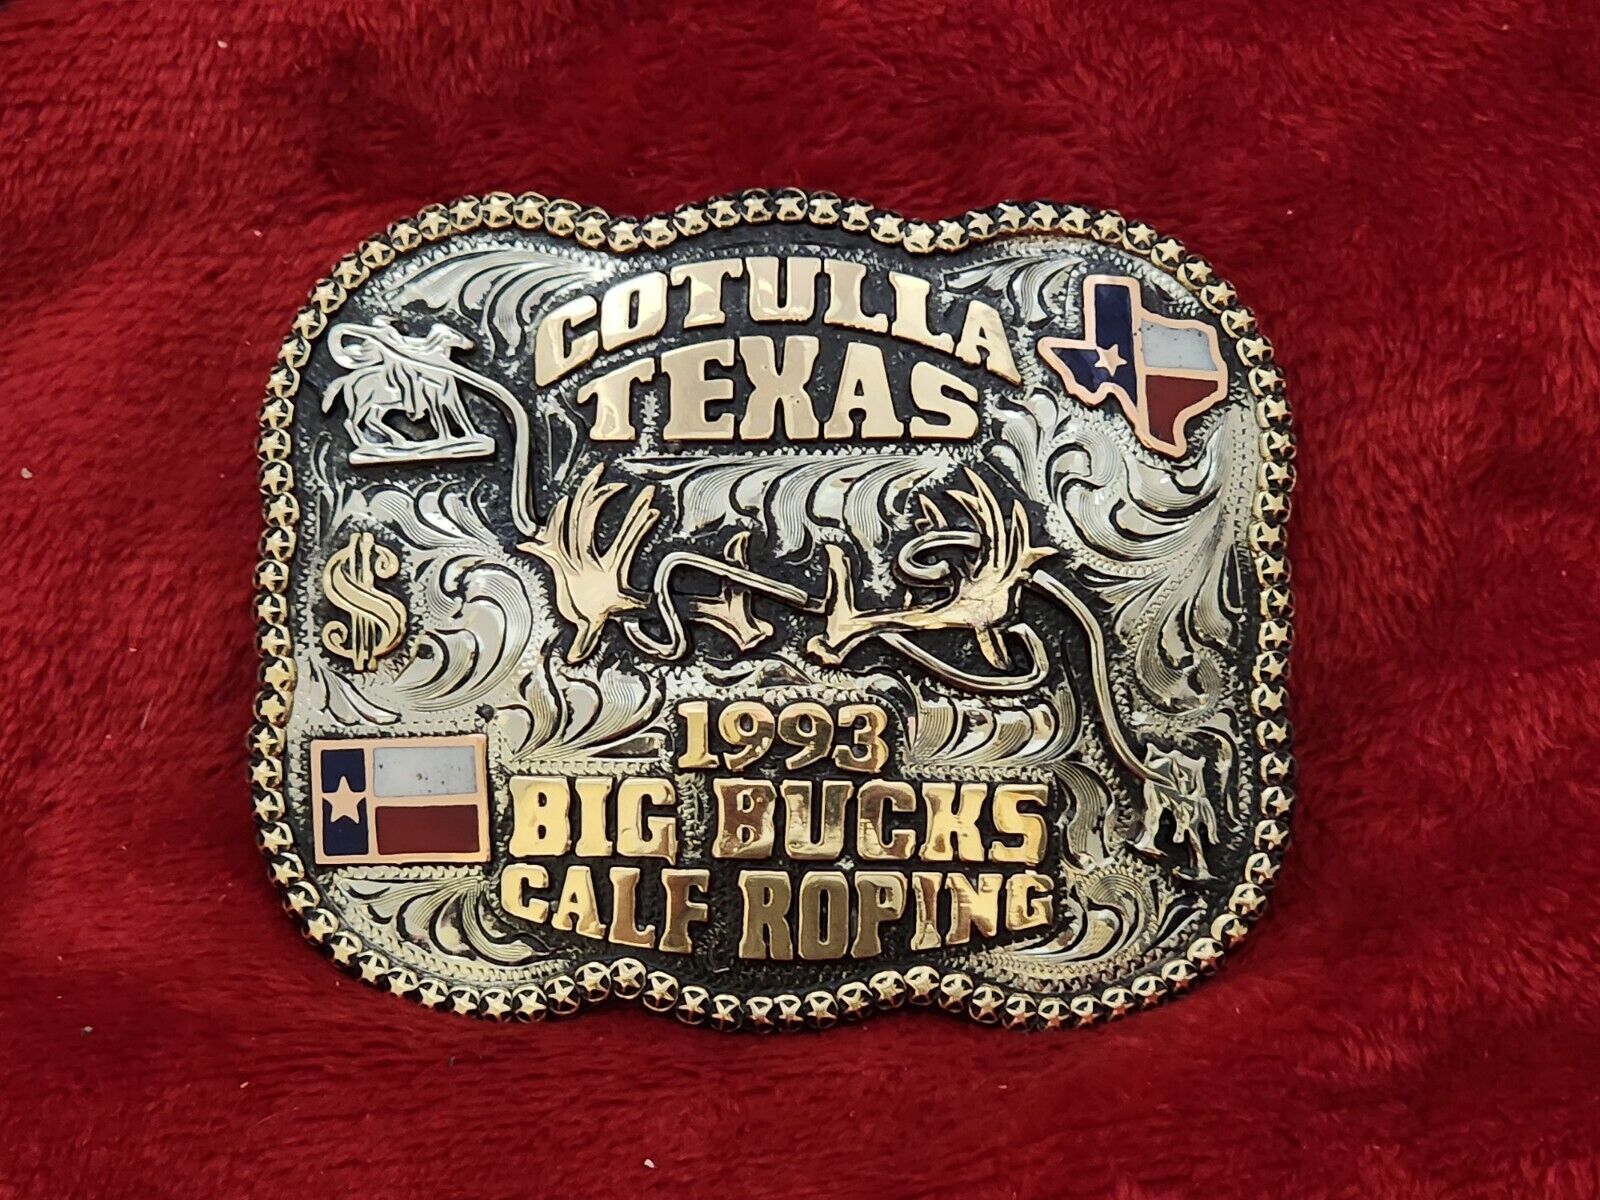 CHAMPION RODEO TROPHY BUCKLE PRO CALF ROPING☆COTULLA TEXAS☆1993☆RARE#331